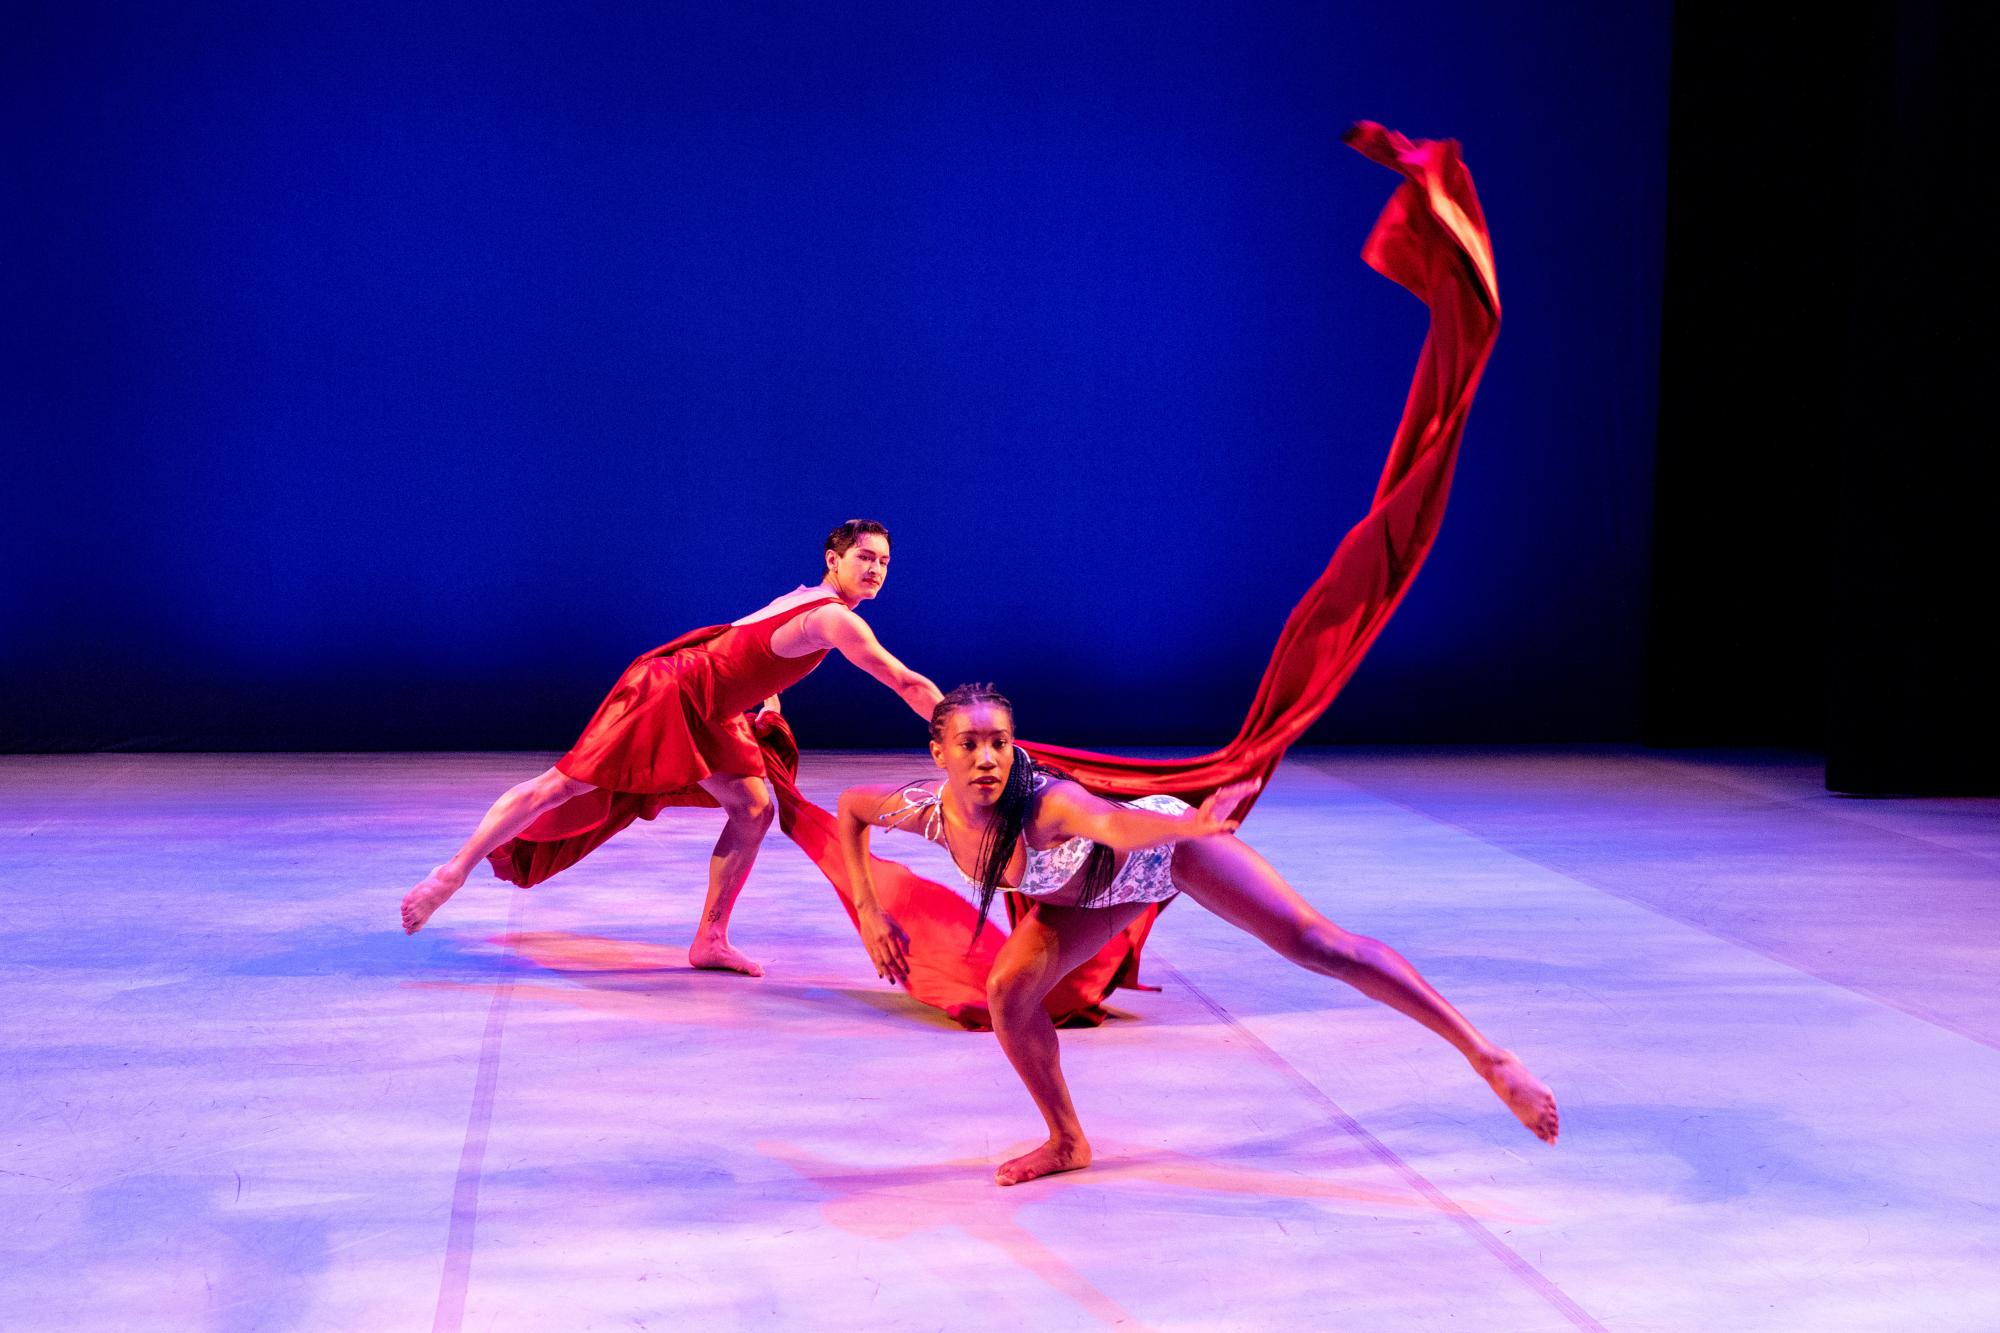 a dancer in a red dress throws his long train of red fabric, lining up with another dancer's outstretched arm